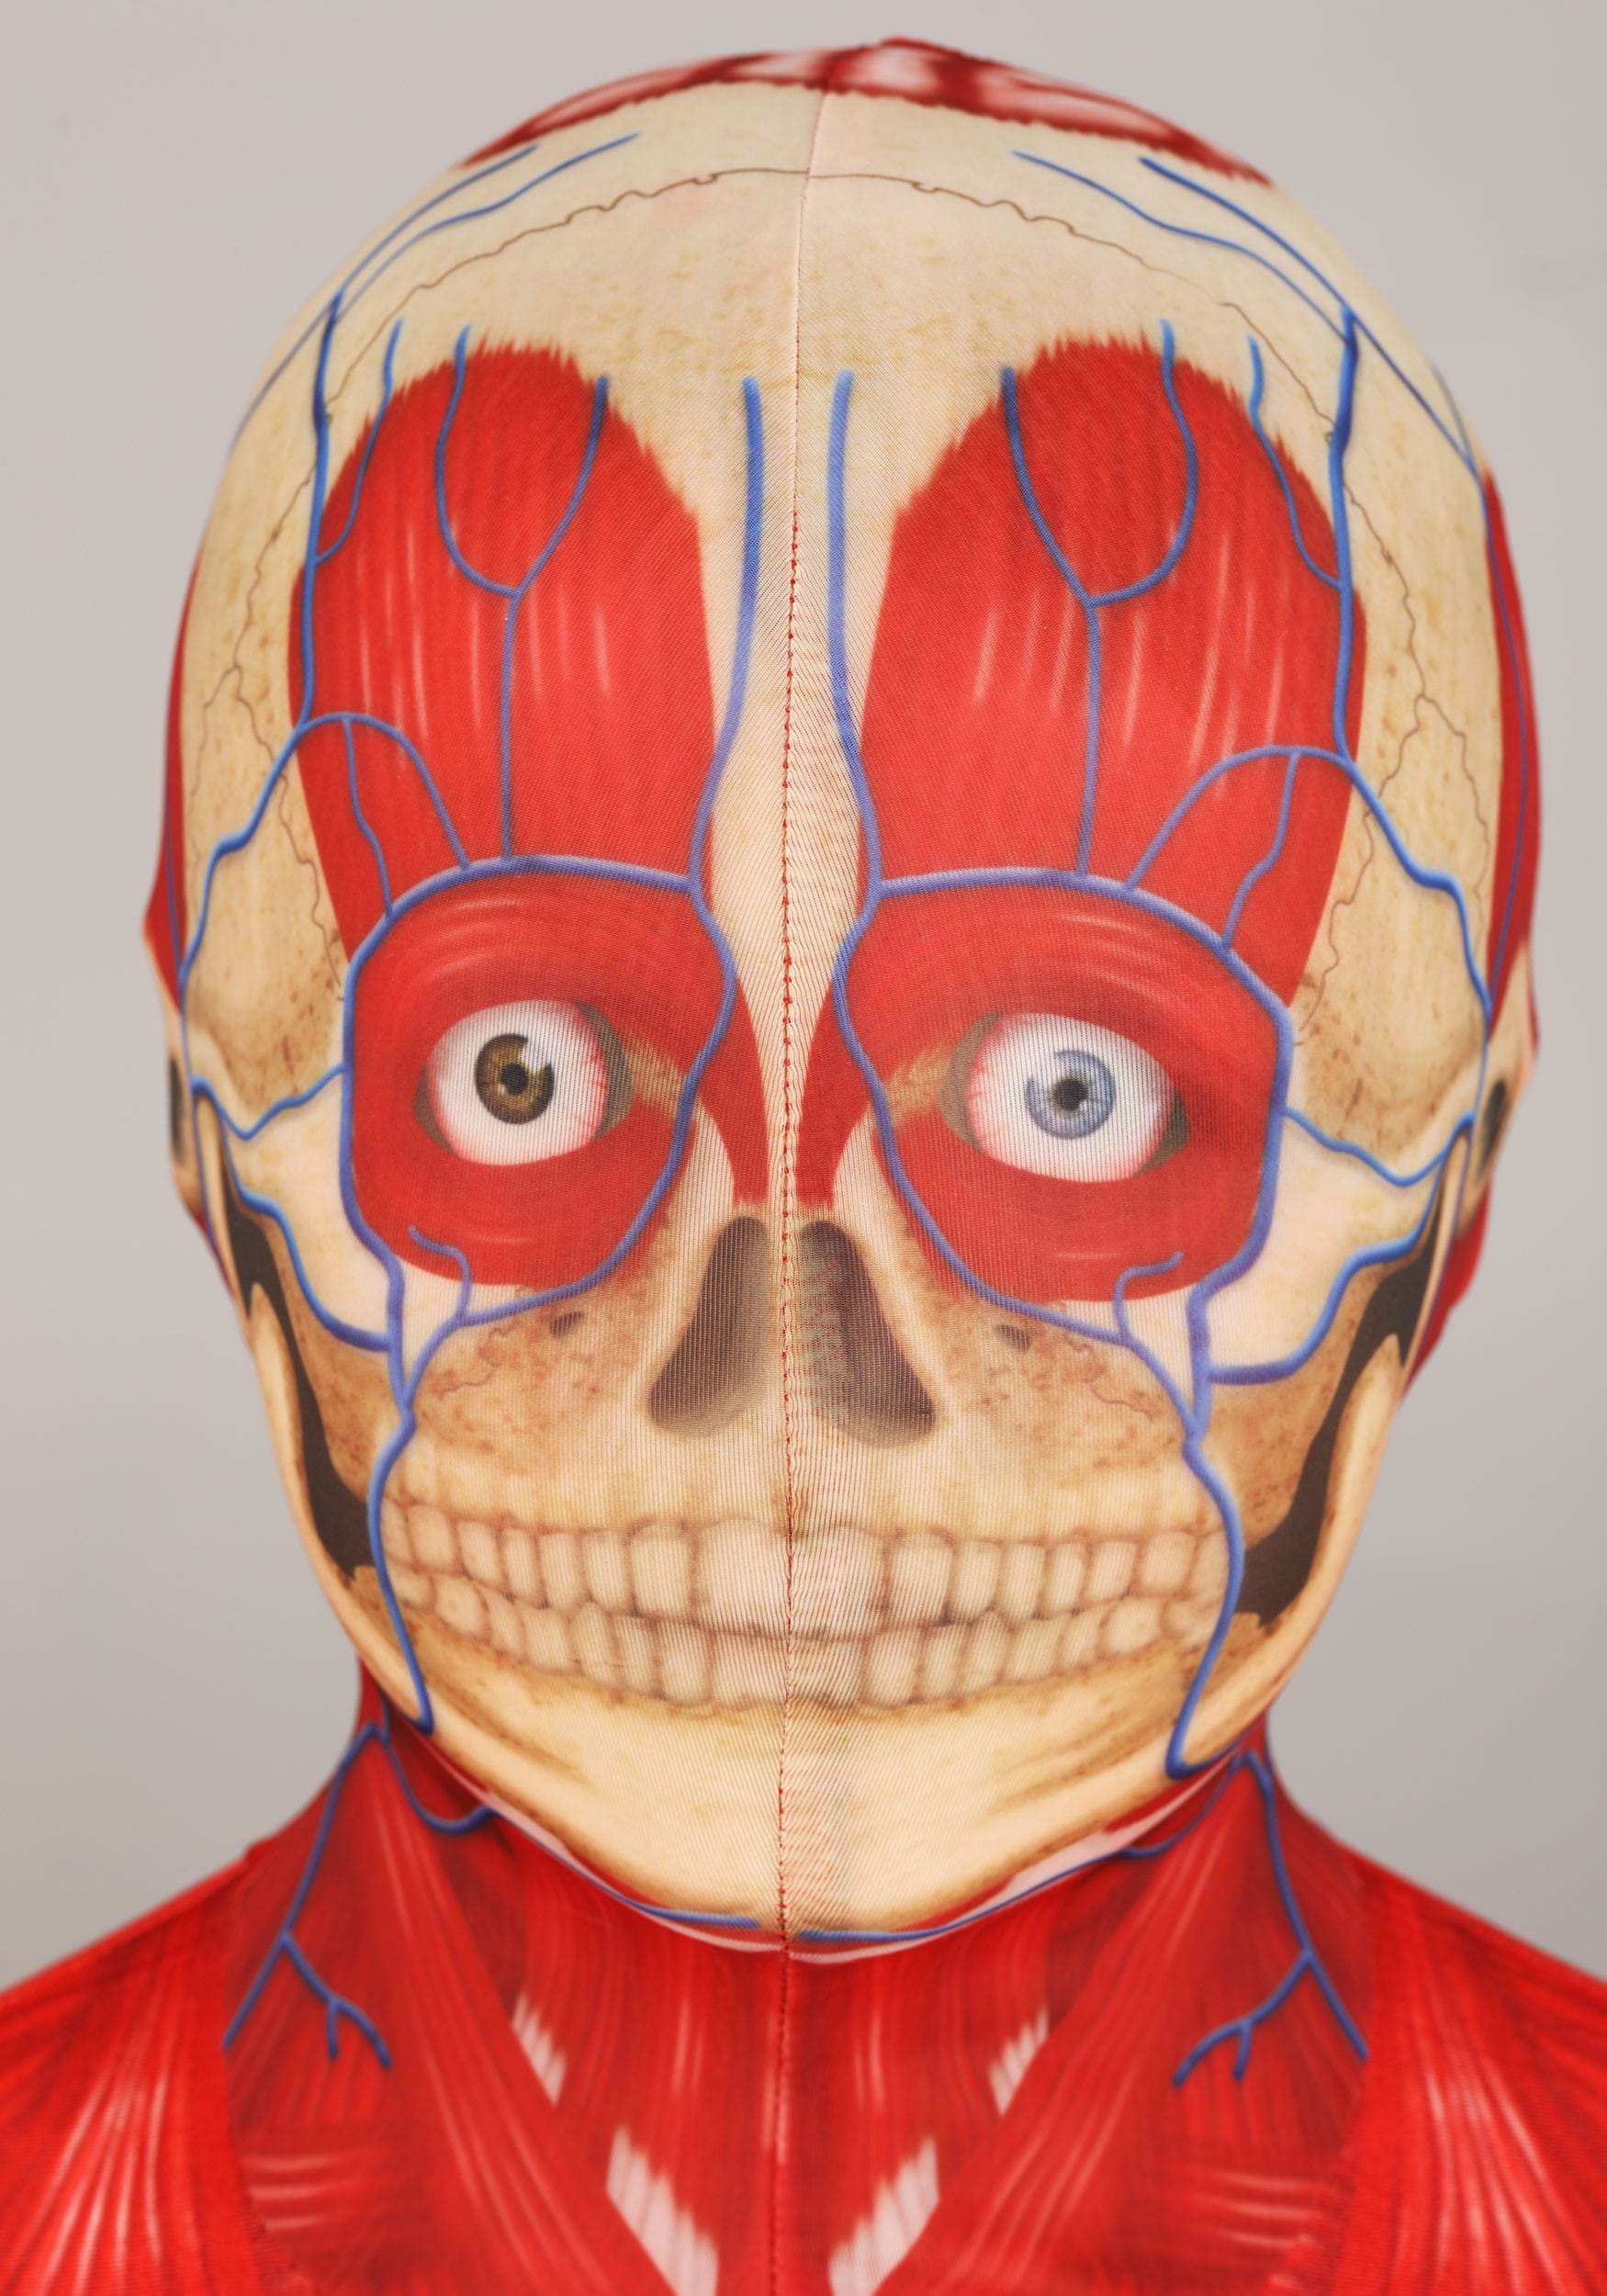 Kid's Anatomical Muscle Suit Costume